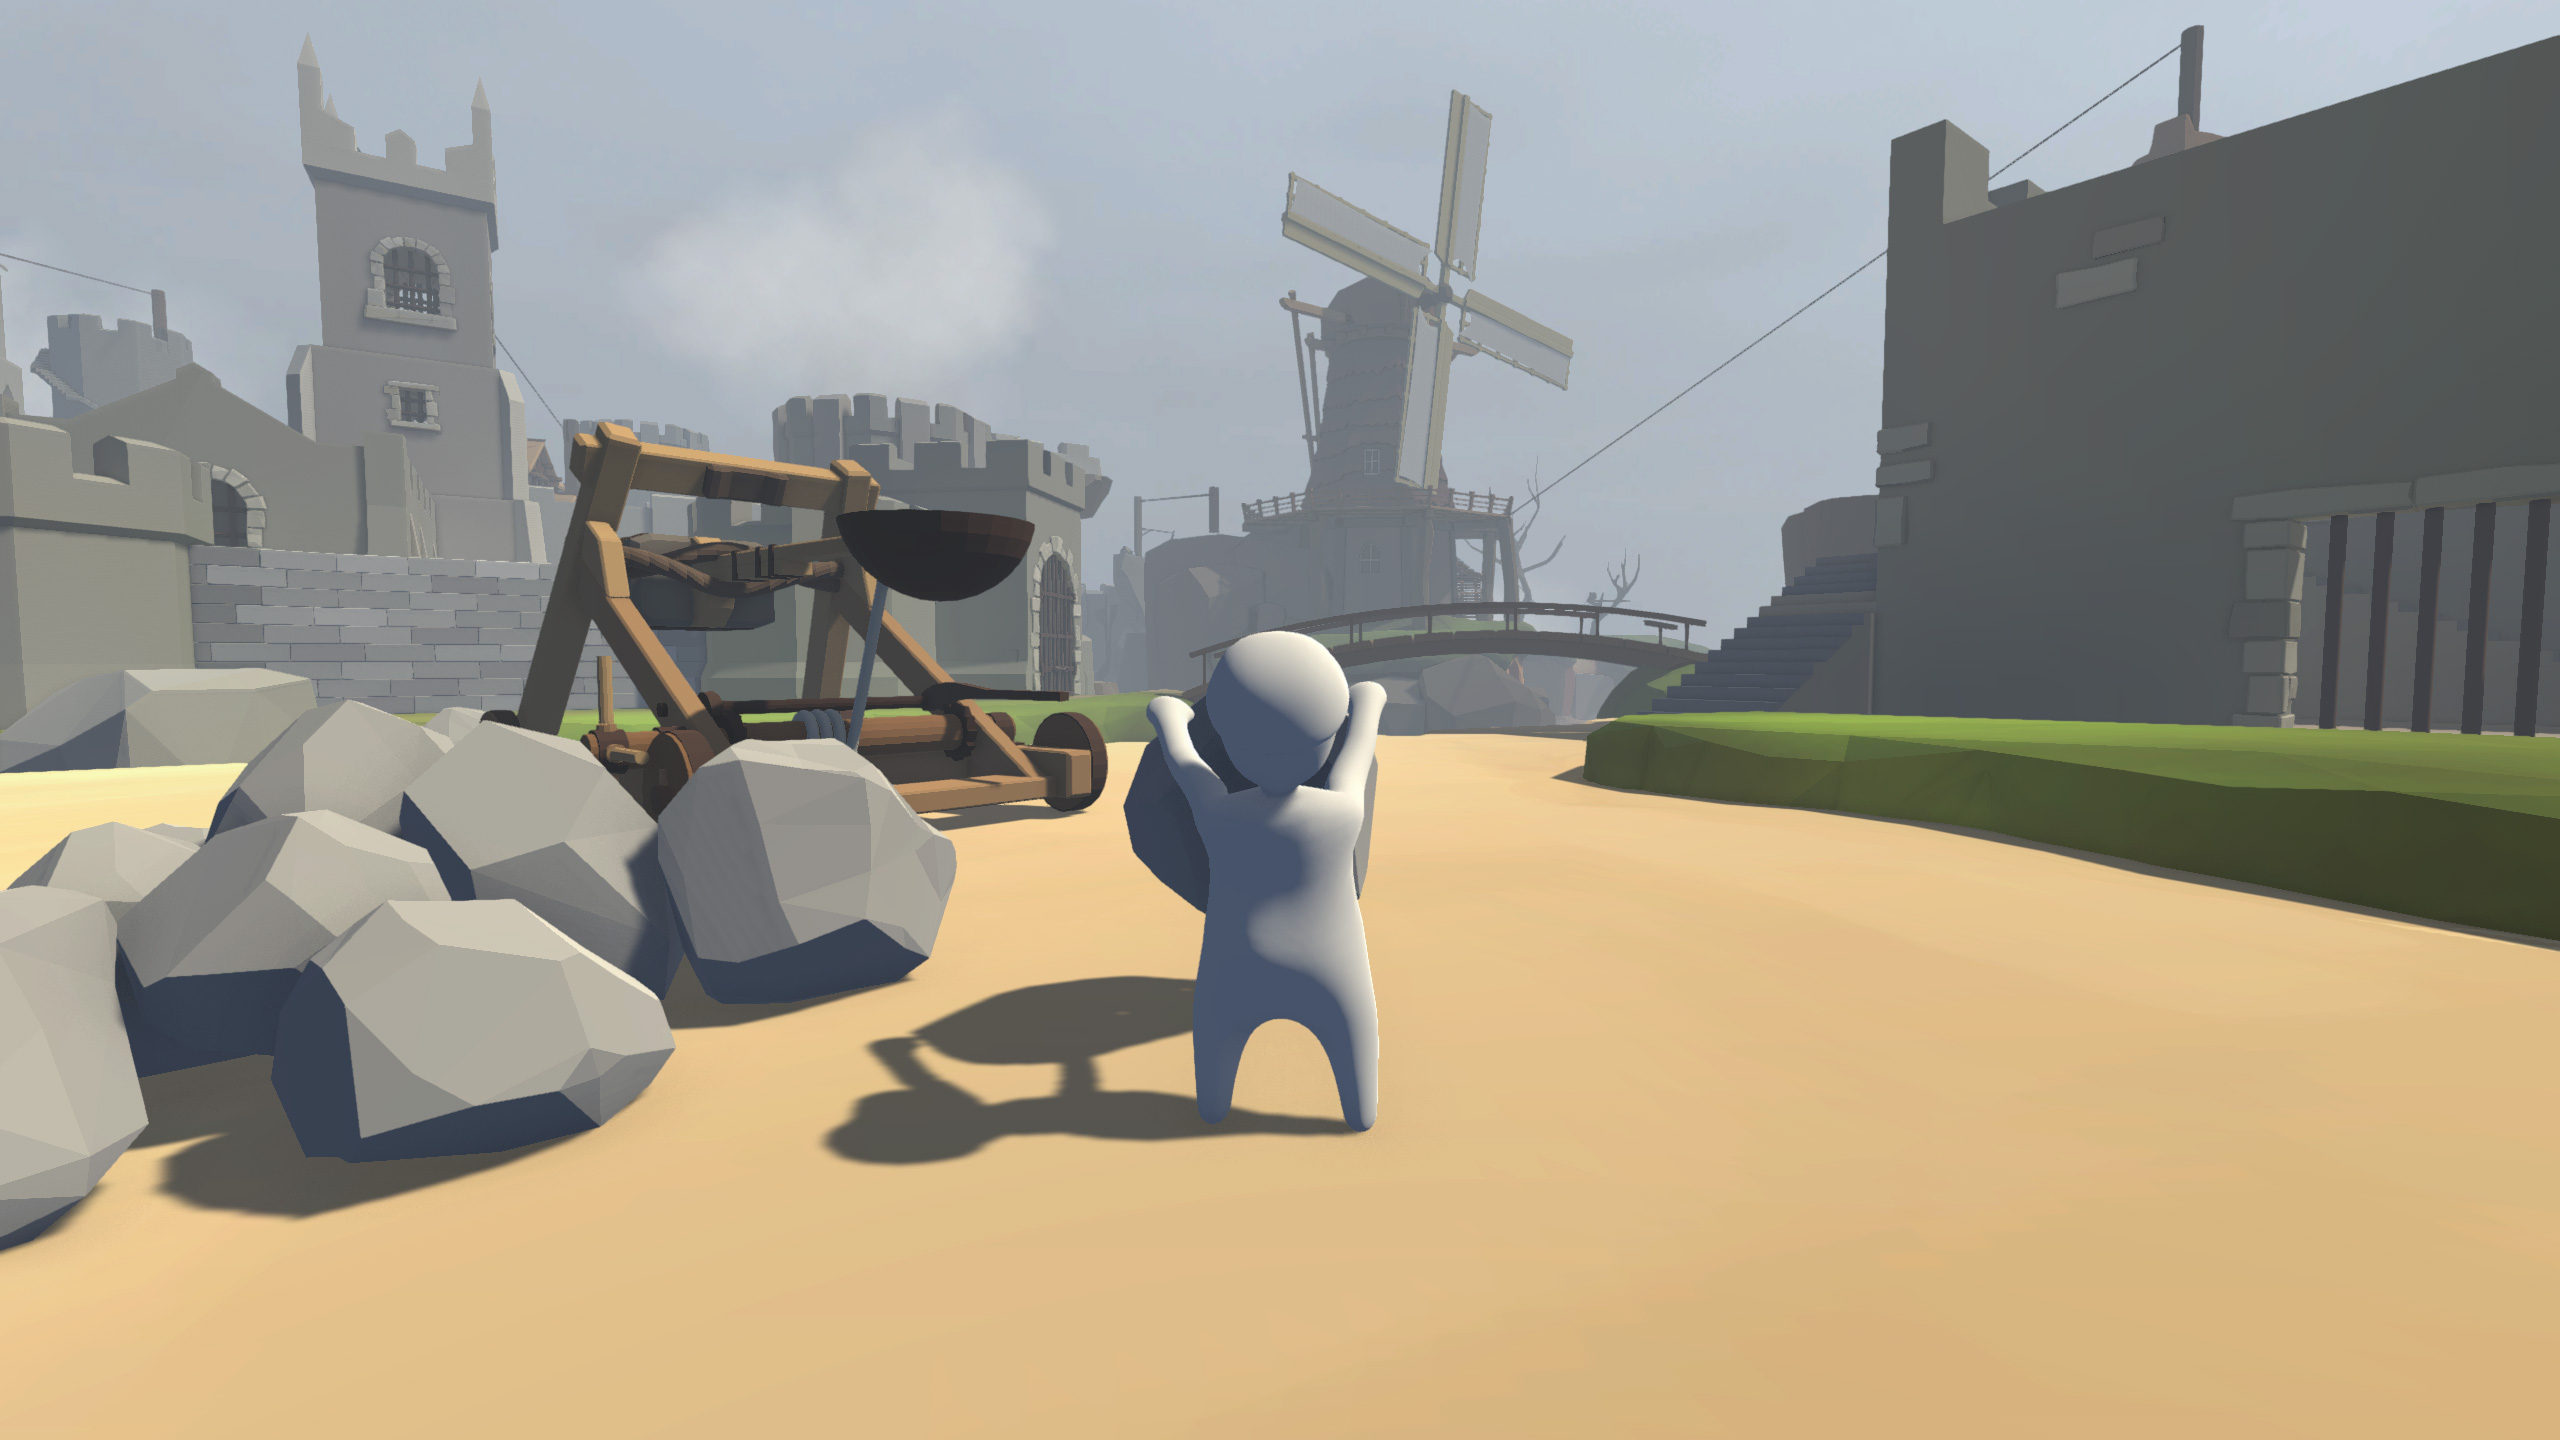 505 Games and Curve Digital Are Bringing ‘Human: Fall Flat’ to Mobile Devices